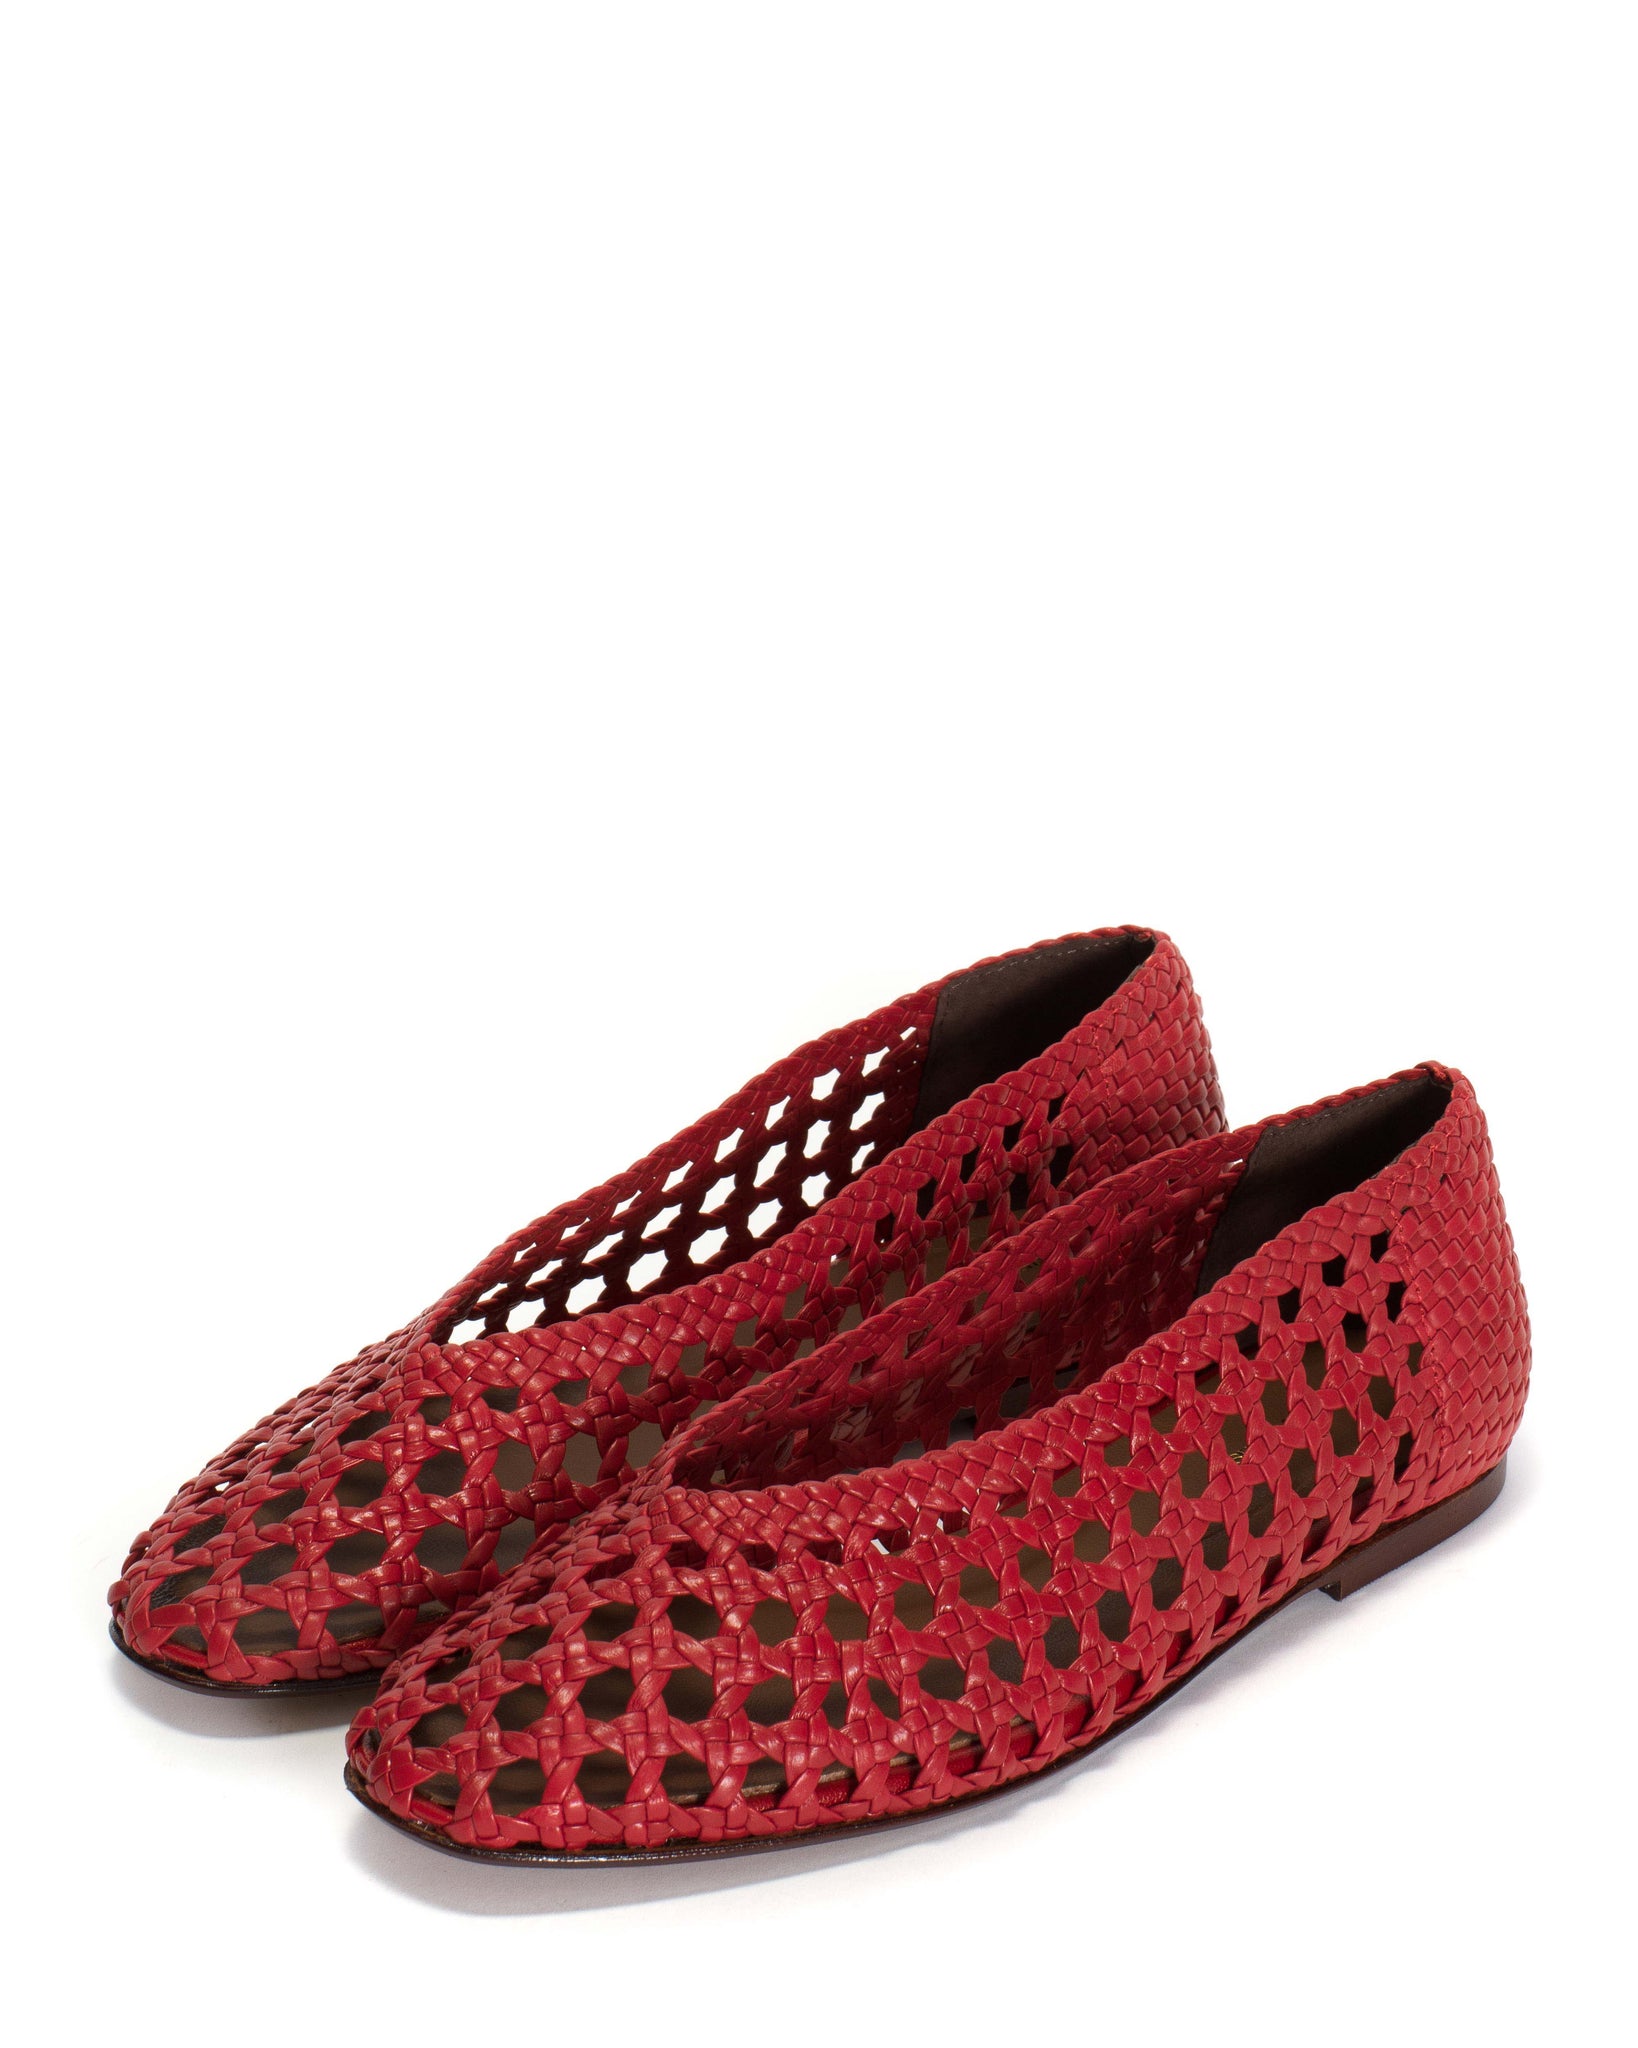 Sessi 10 Hand-braided leather Ruby red - Anonymous Copenhagen